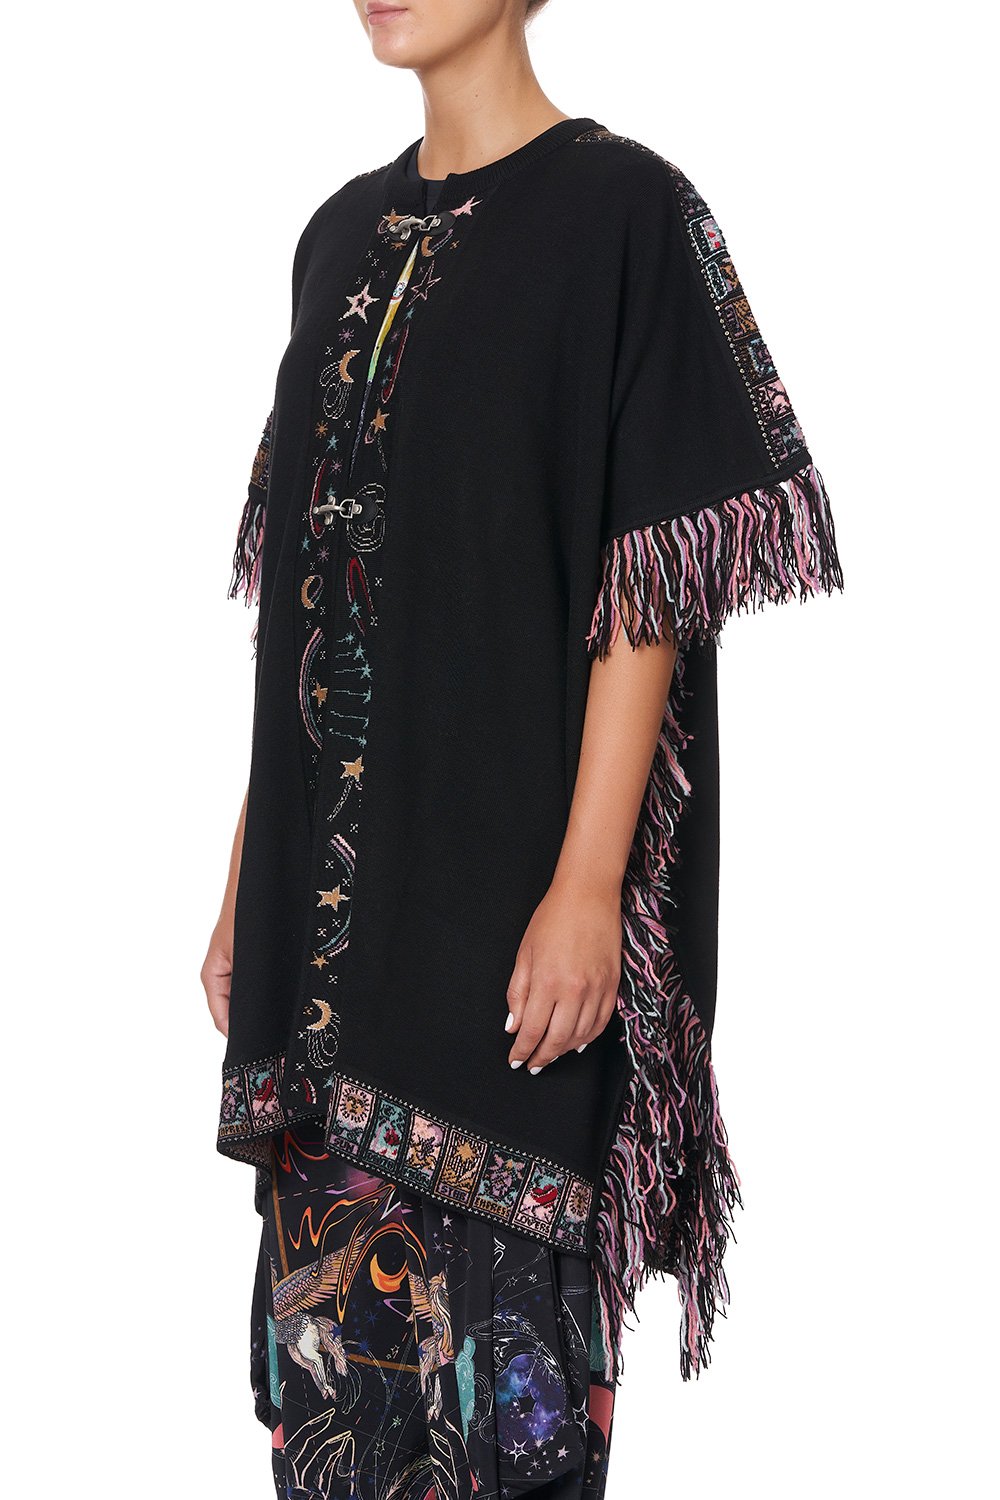 KNIT JACQUARD PONCHO WITH HARDWARE MIDNIGHT MOON HOUSE